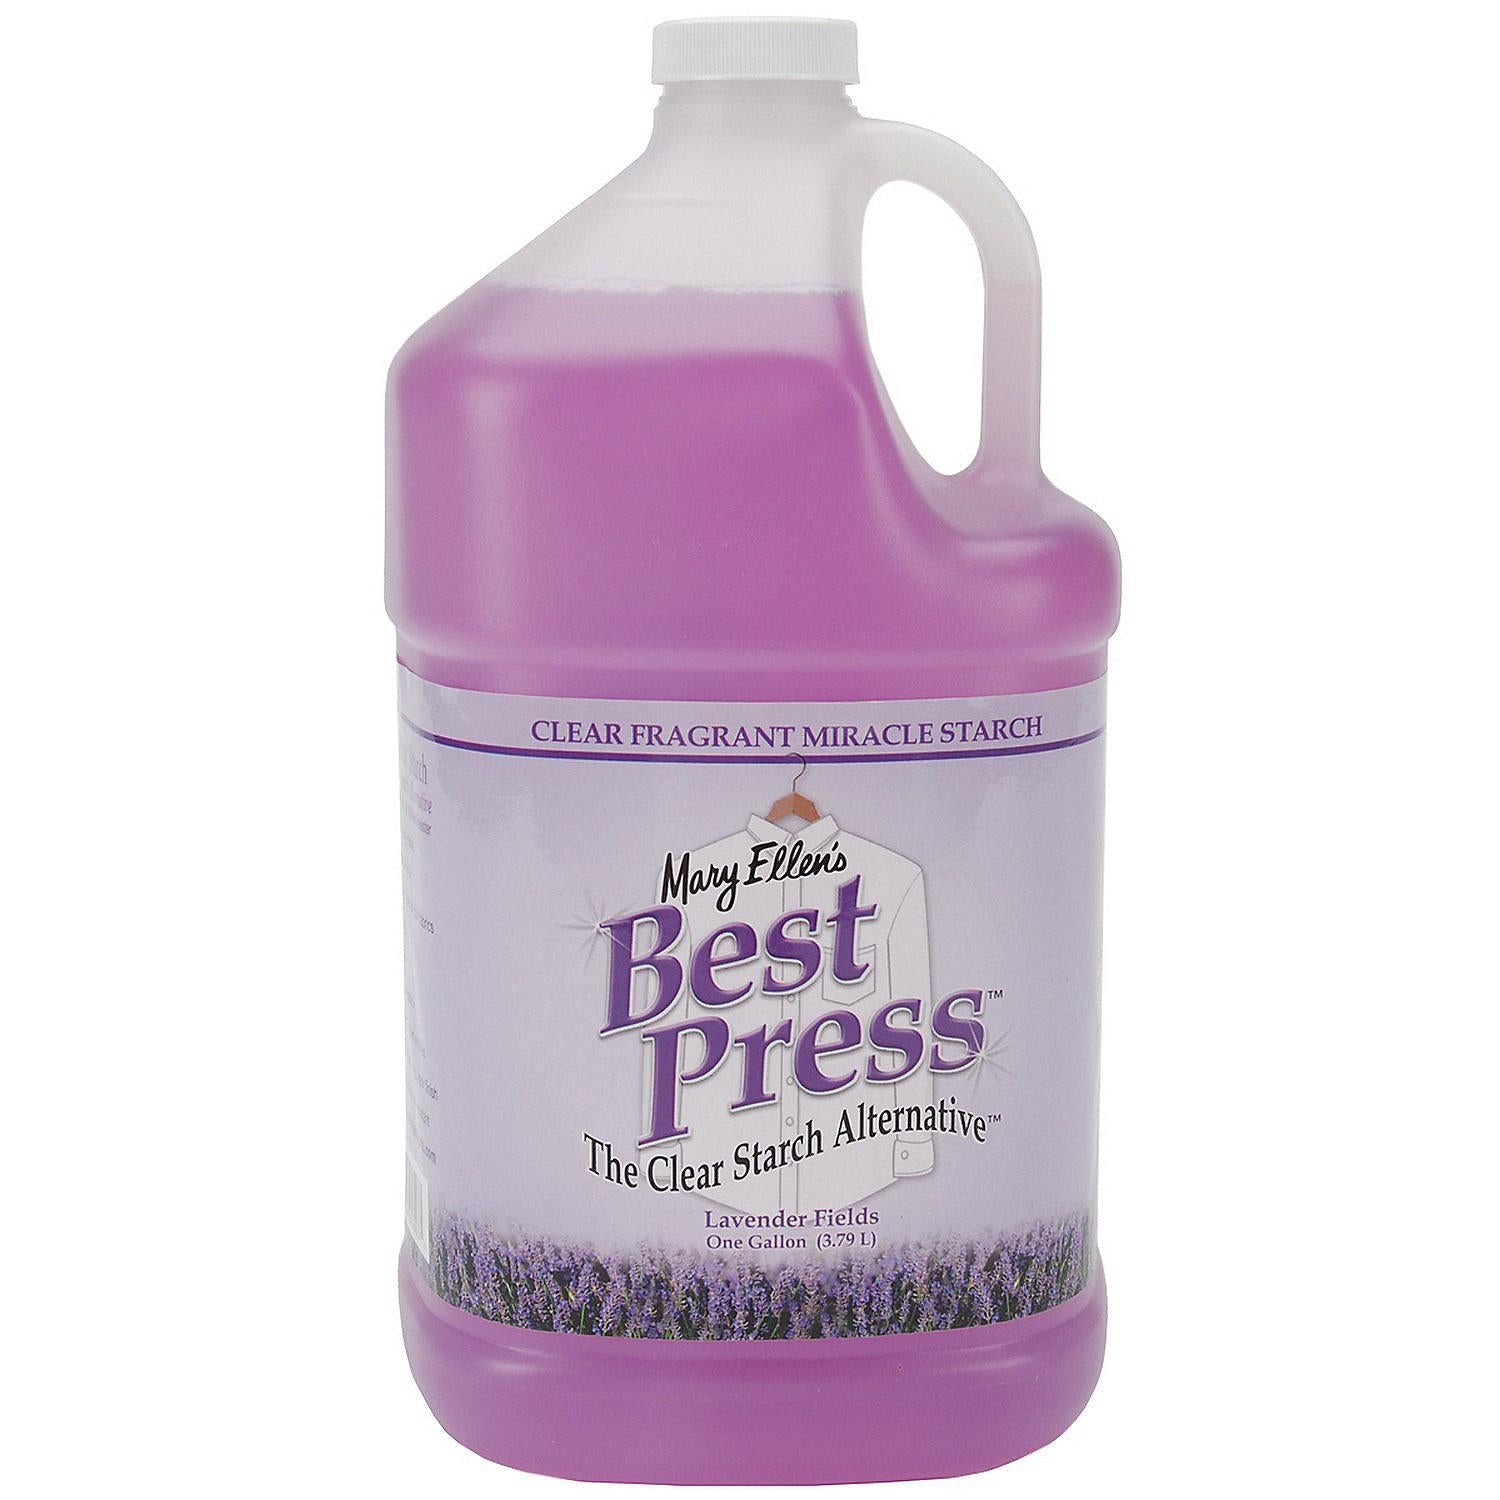 Mary Ellen's Best Press Clear Starch Alternative 16-Ounce, Scent Free